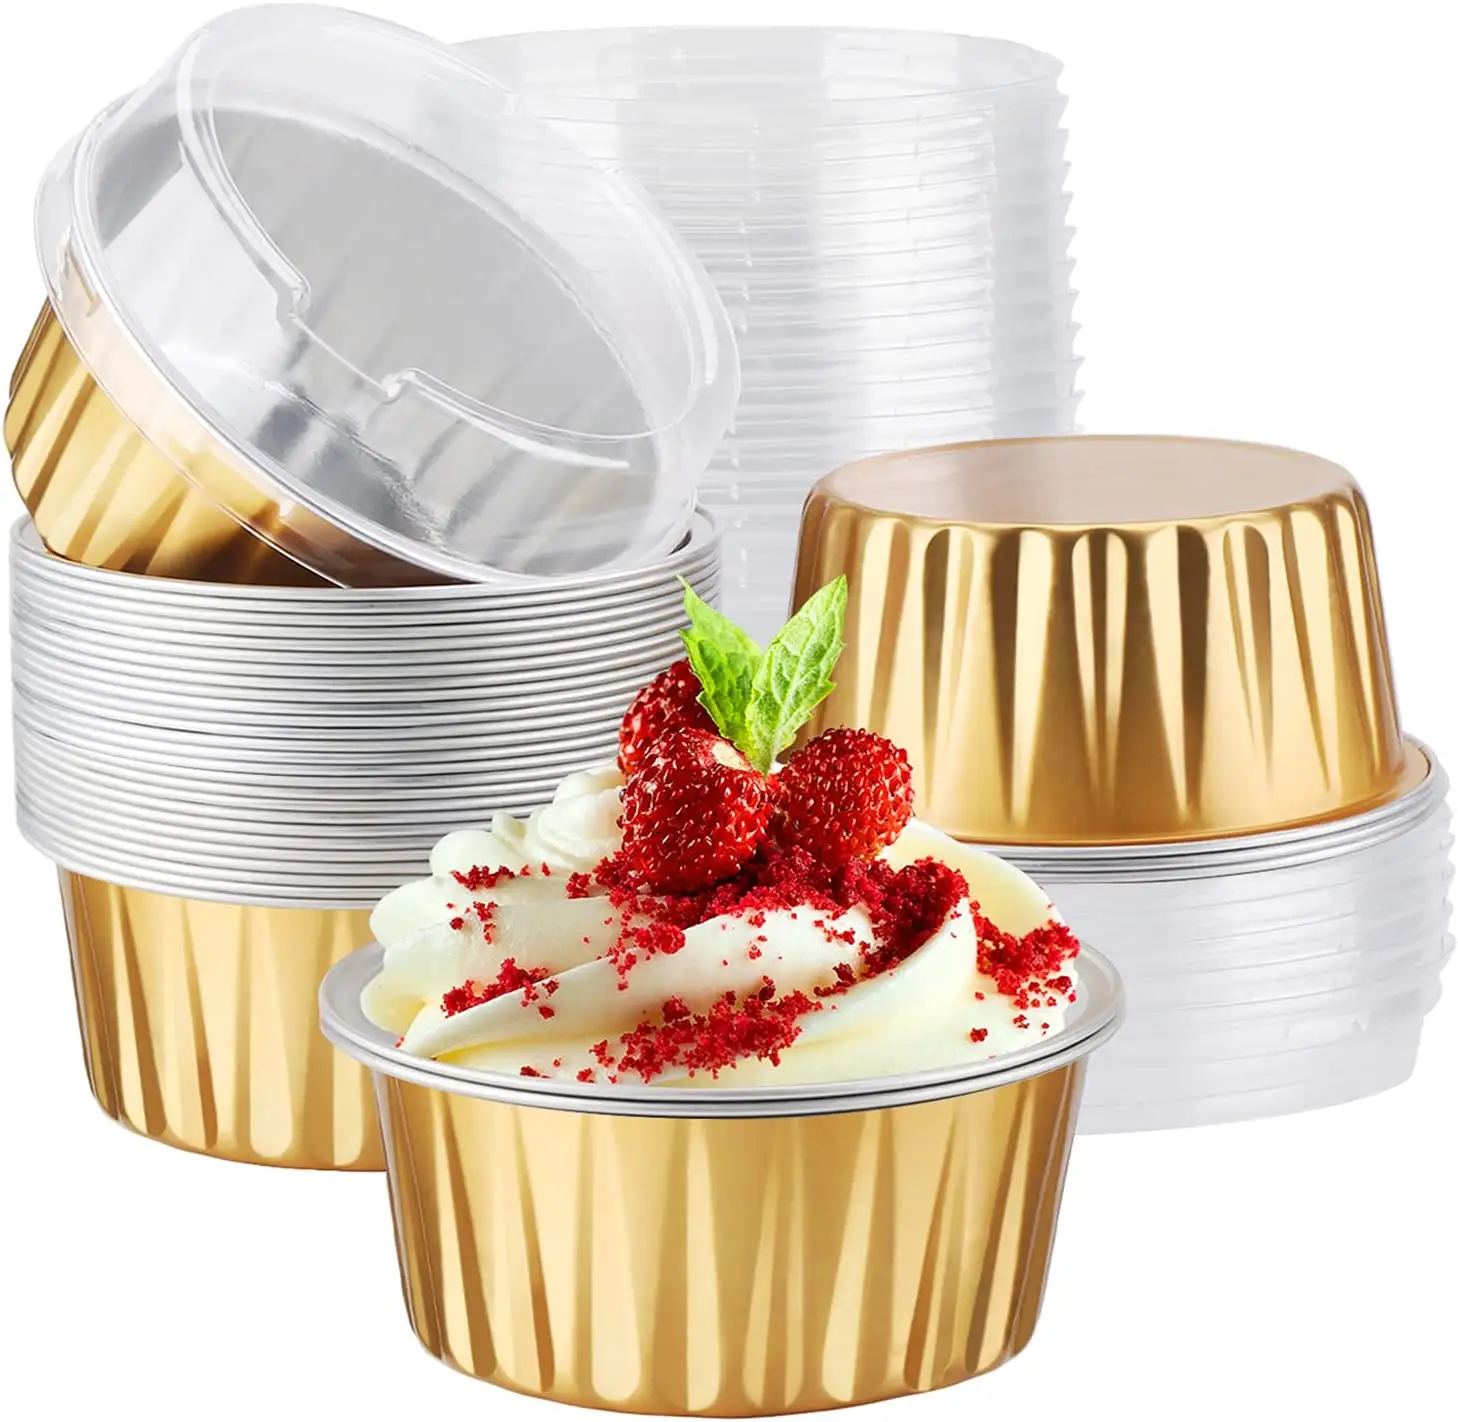 Aluminum Foil Muffin Liners Cups with Lids, Cupcake liners Baking Cups, Disposable Foil Ramekins Creme Brulee Pans Holders